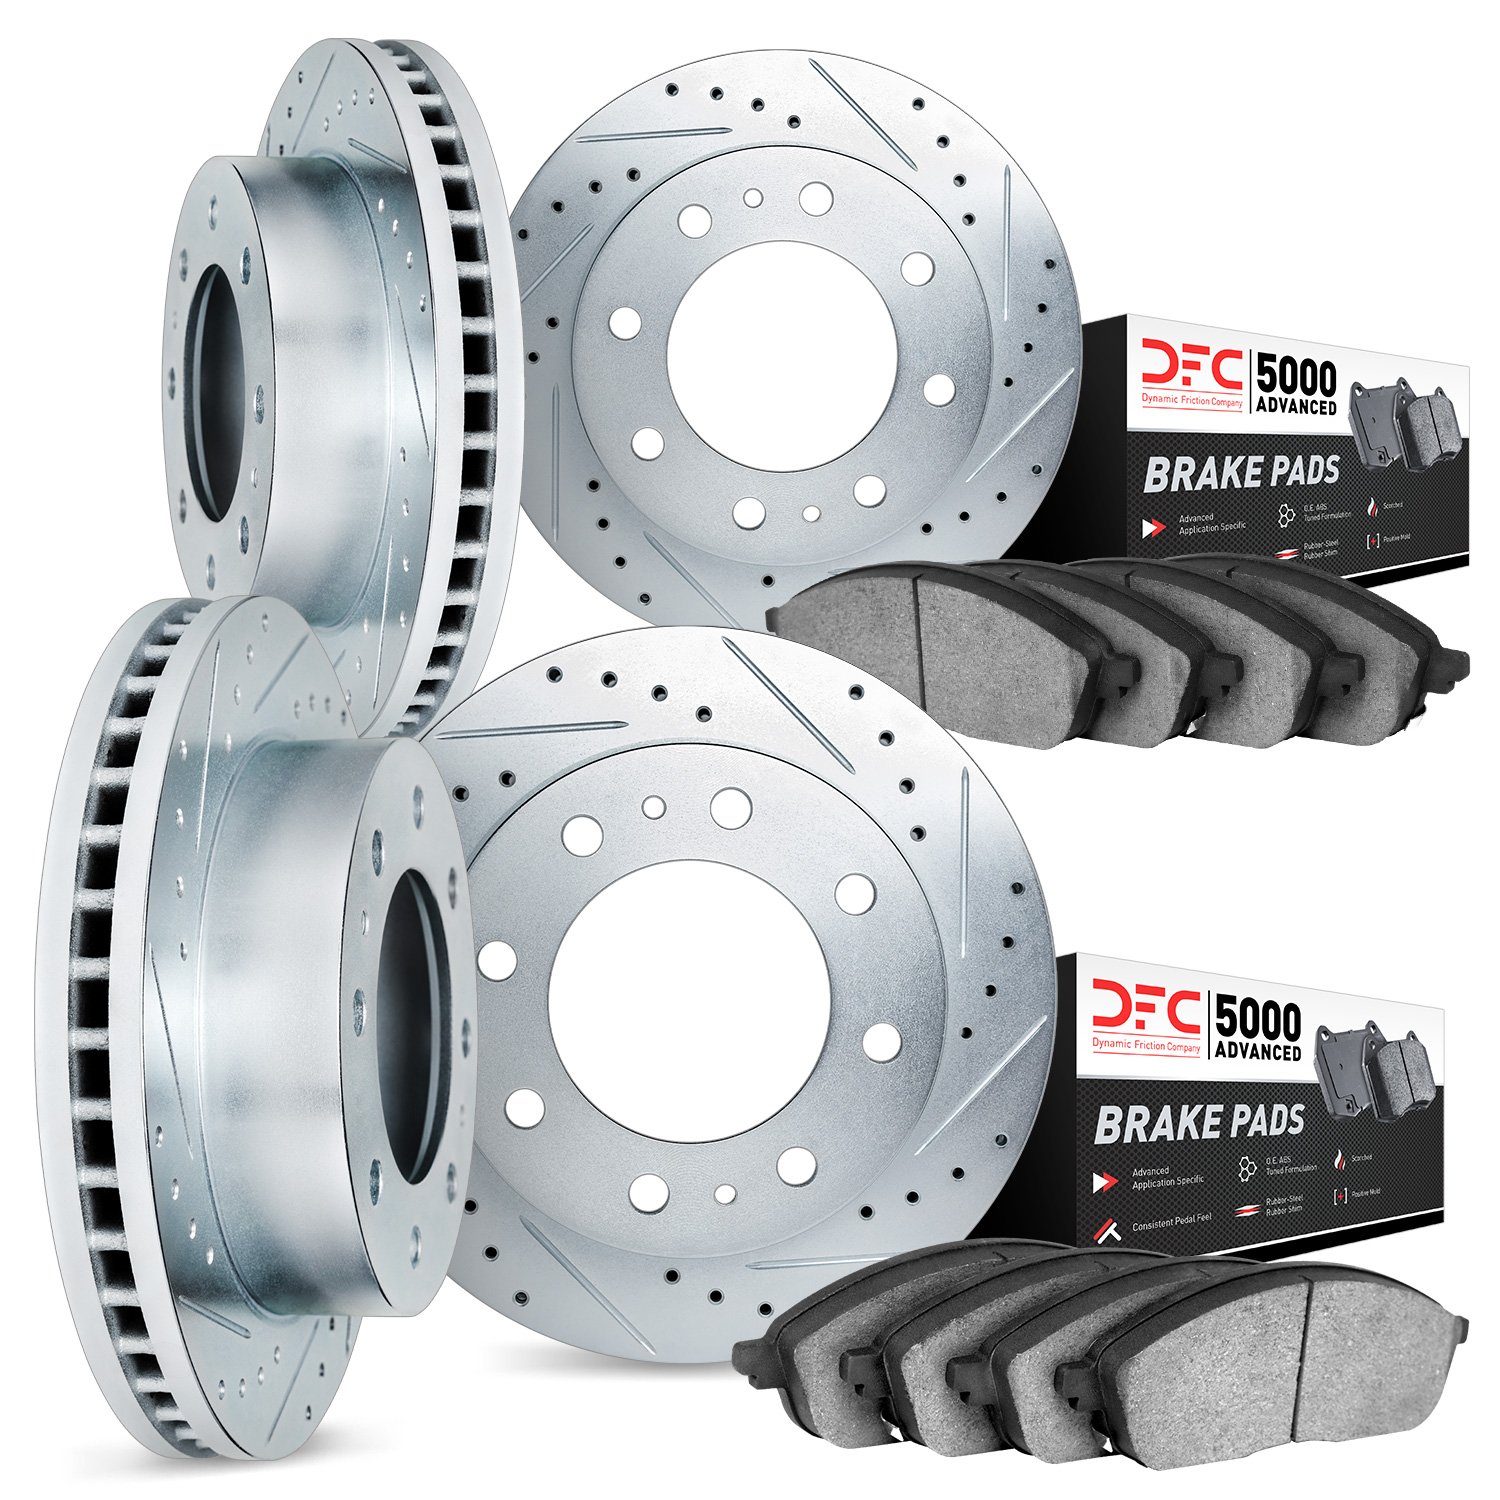 7504-54370 Drilled/Slotted Brake Rotors w/5000 Advanced Brake Pads Kit [Silver], 2012-2012 Ford/Lincoln/Mercury/Mazda, Position: